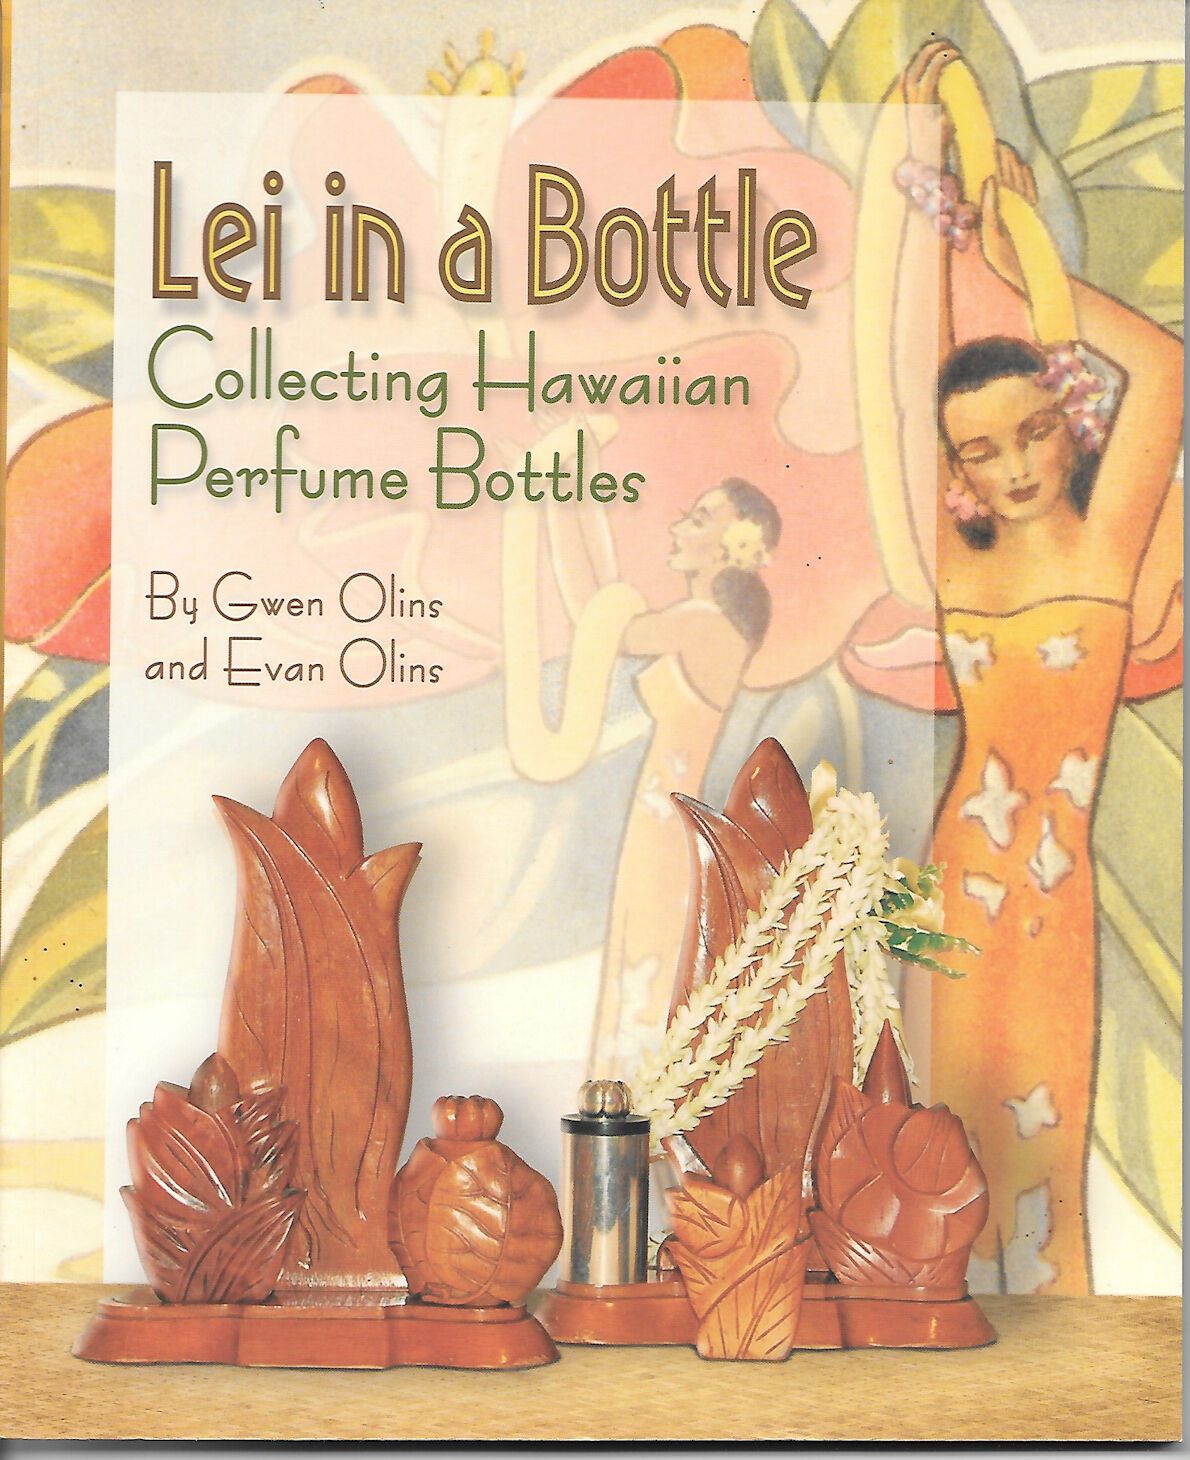    Lei in a Bottle, Collecting Hawaiian Perfume Bottles,  signed by the authors